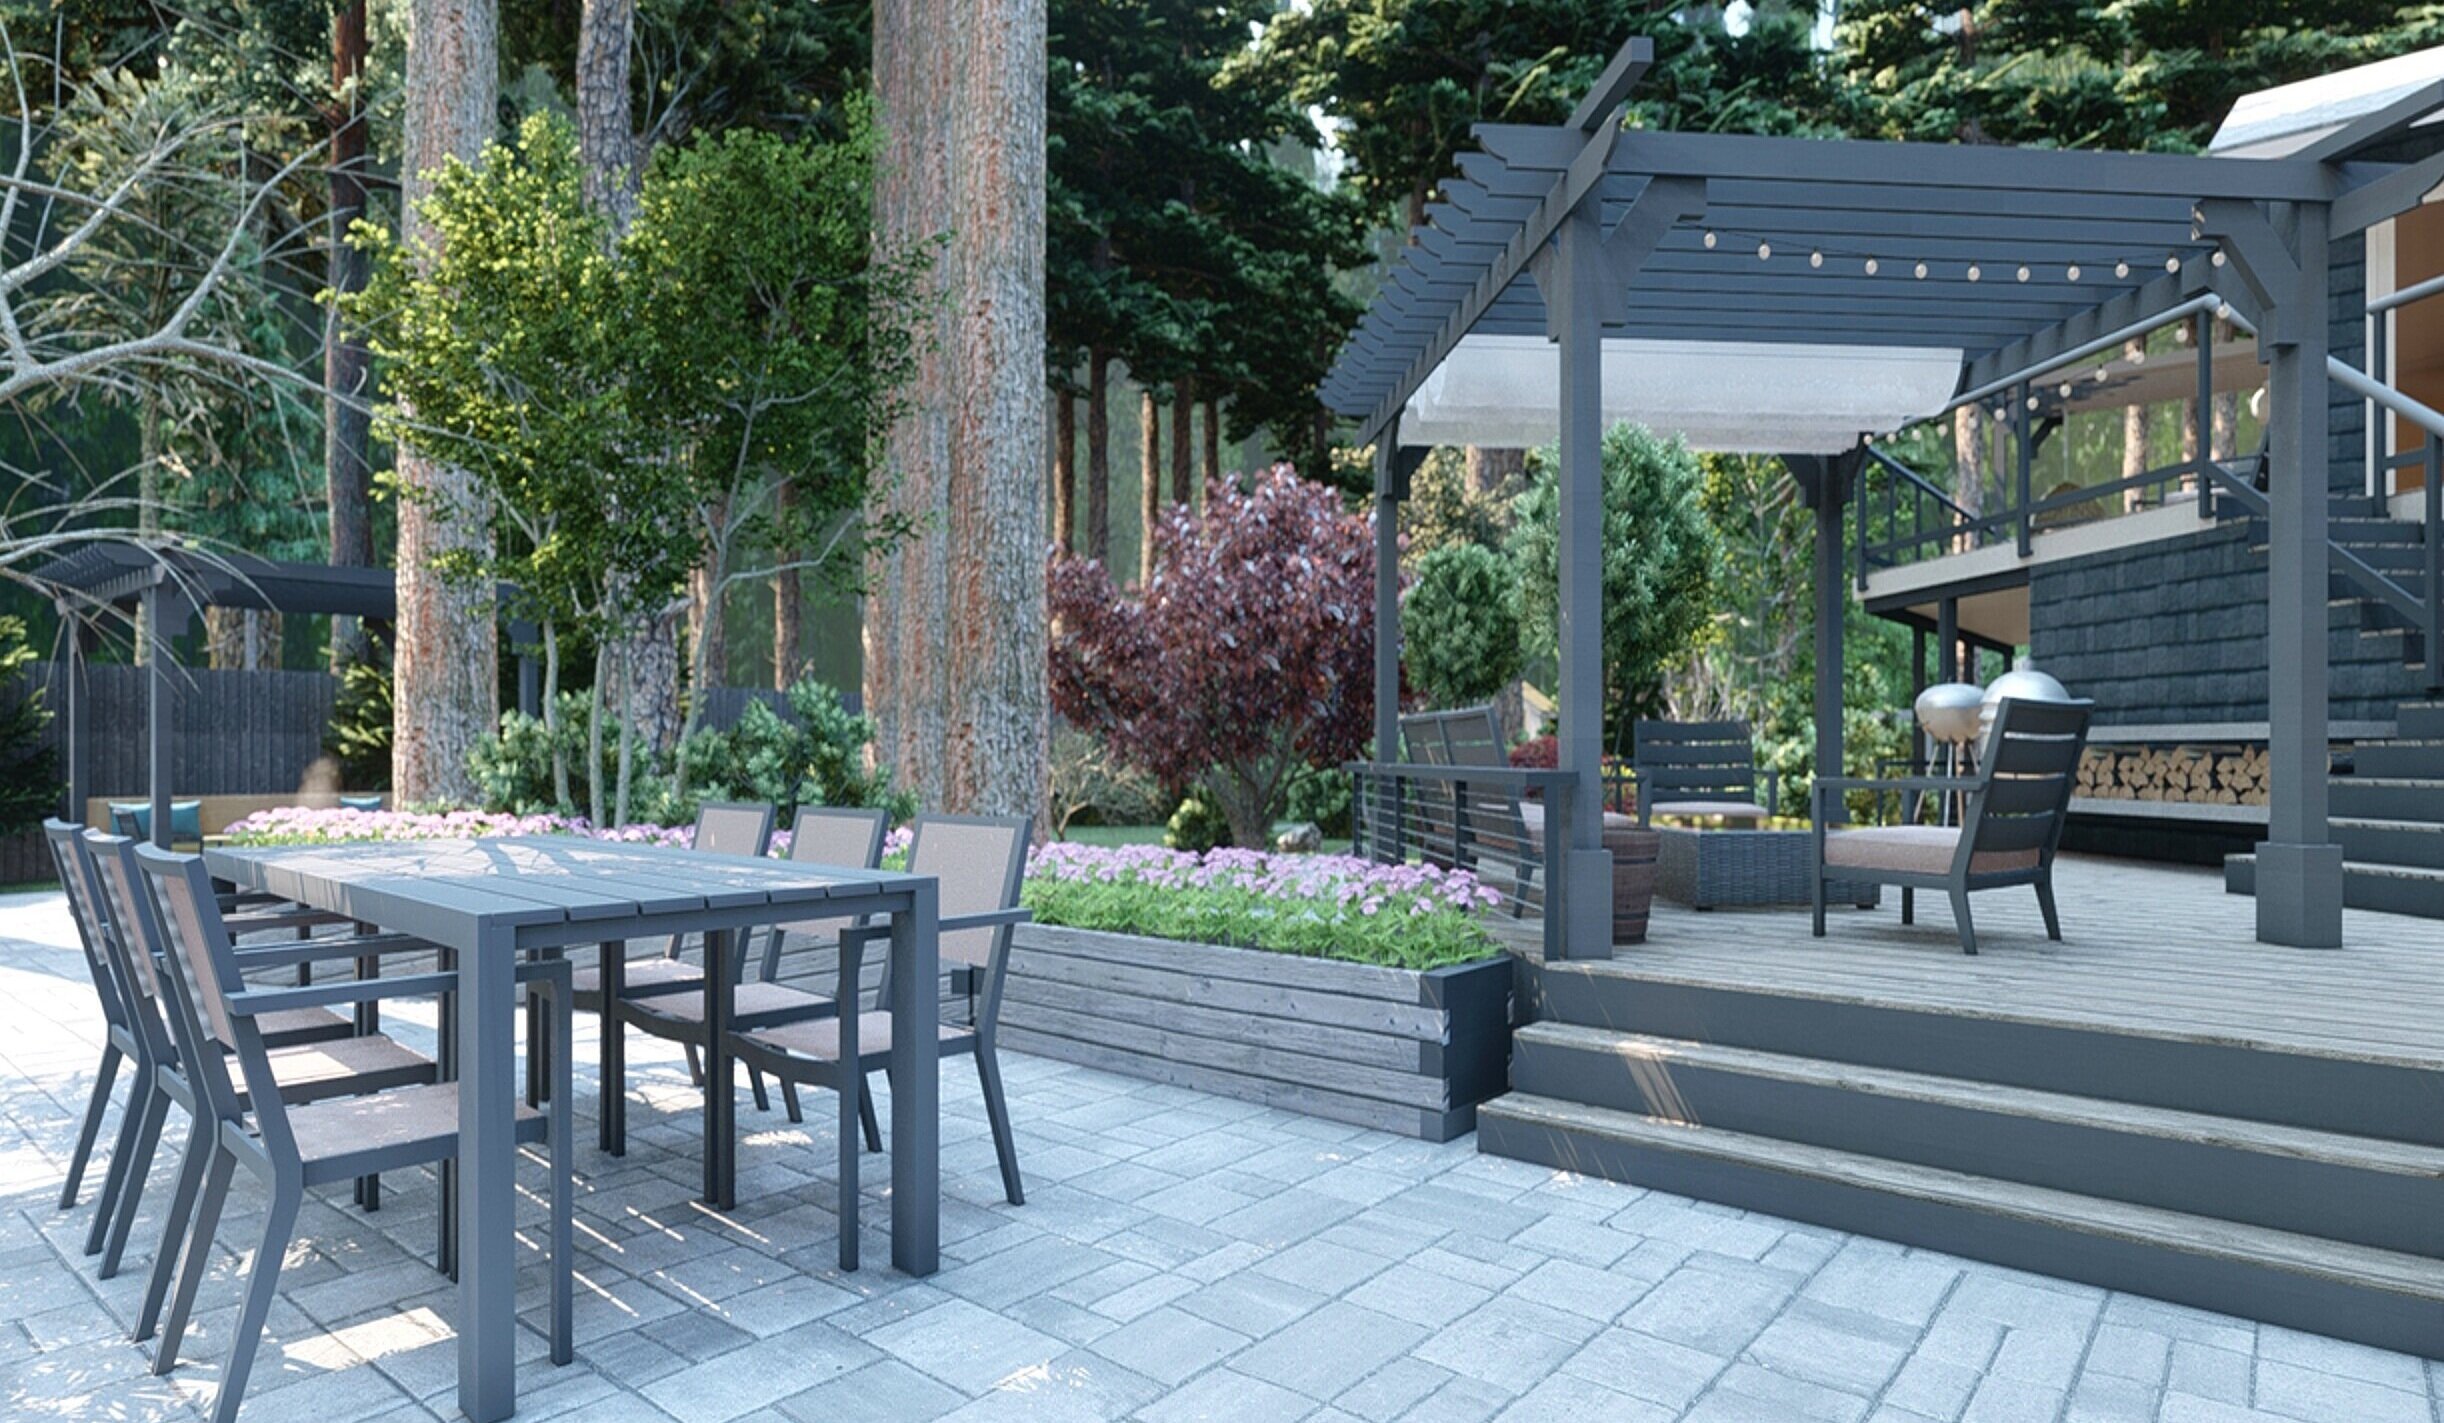 Rustic backyard with pergola, outdoor dining area, and outdoor lounge area